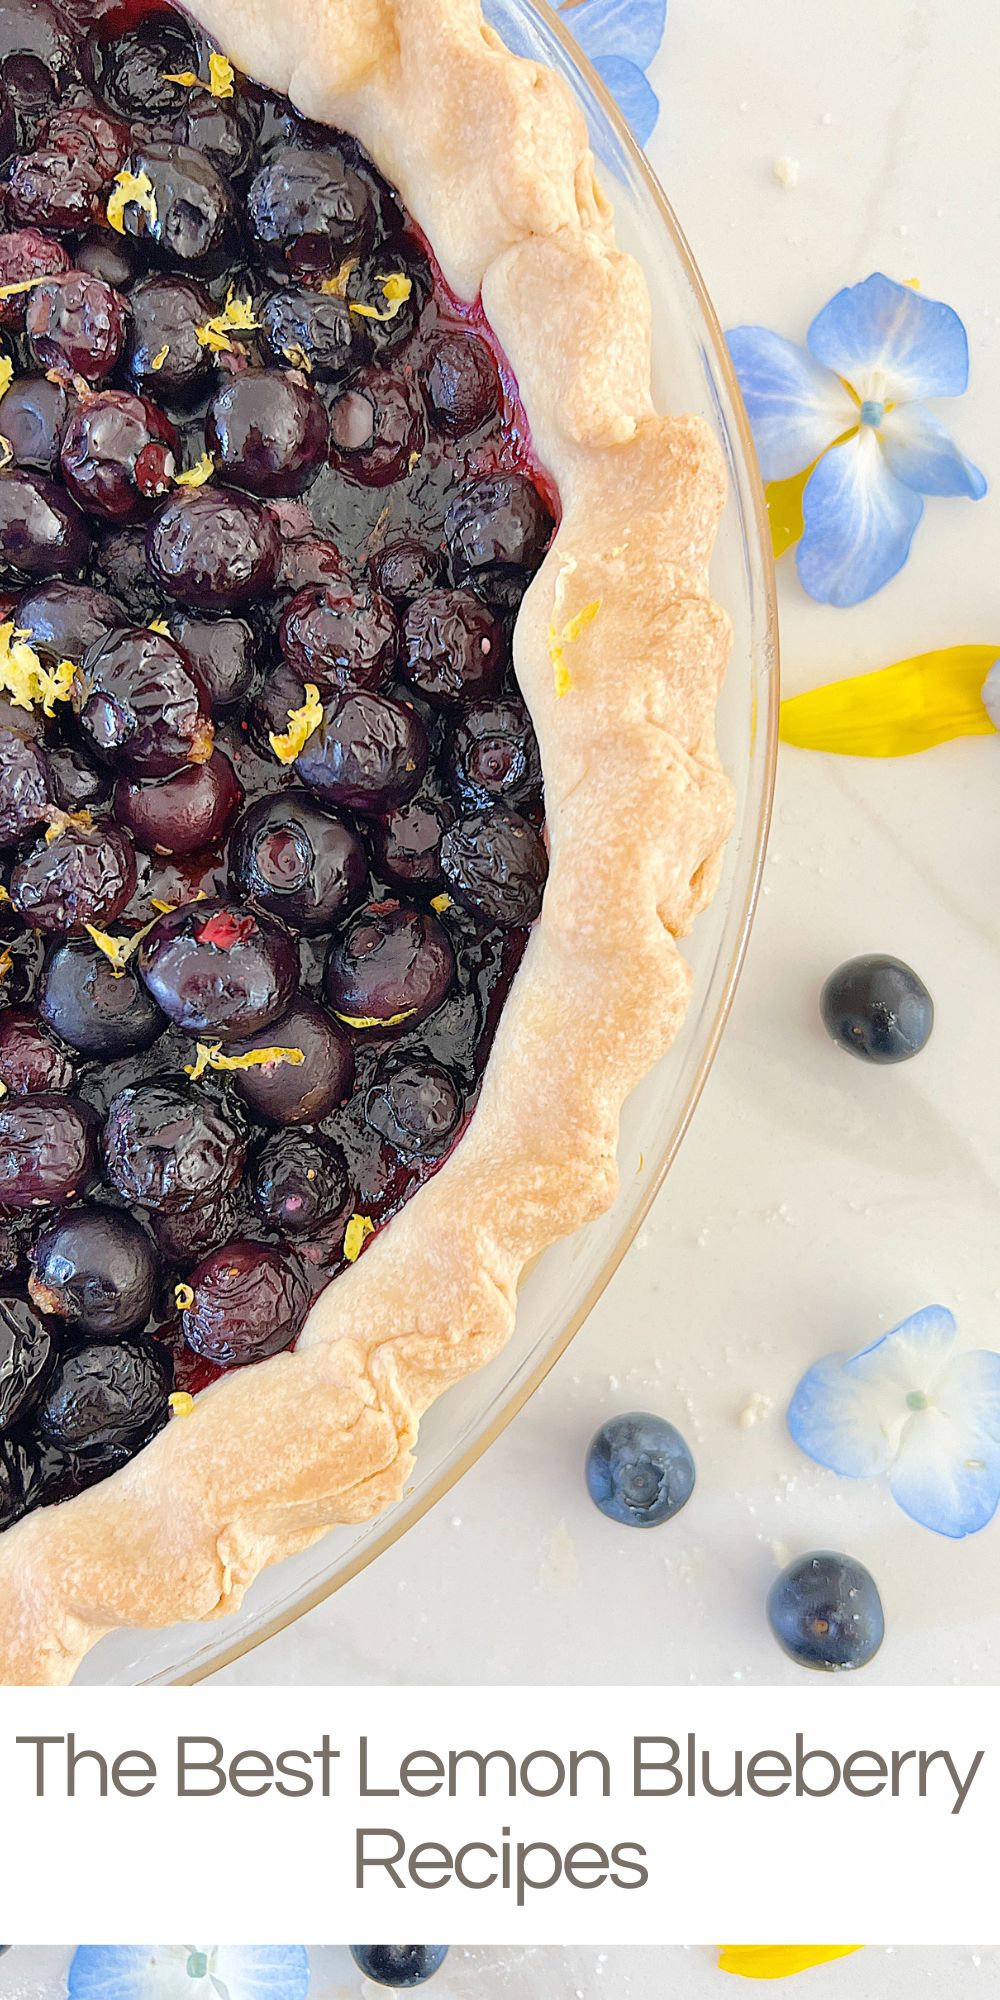 When it comes to fruits that capture both tangy and sweet, lemons and blueberries reign supreme. Lemon blueberry recipes are my favorite!